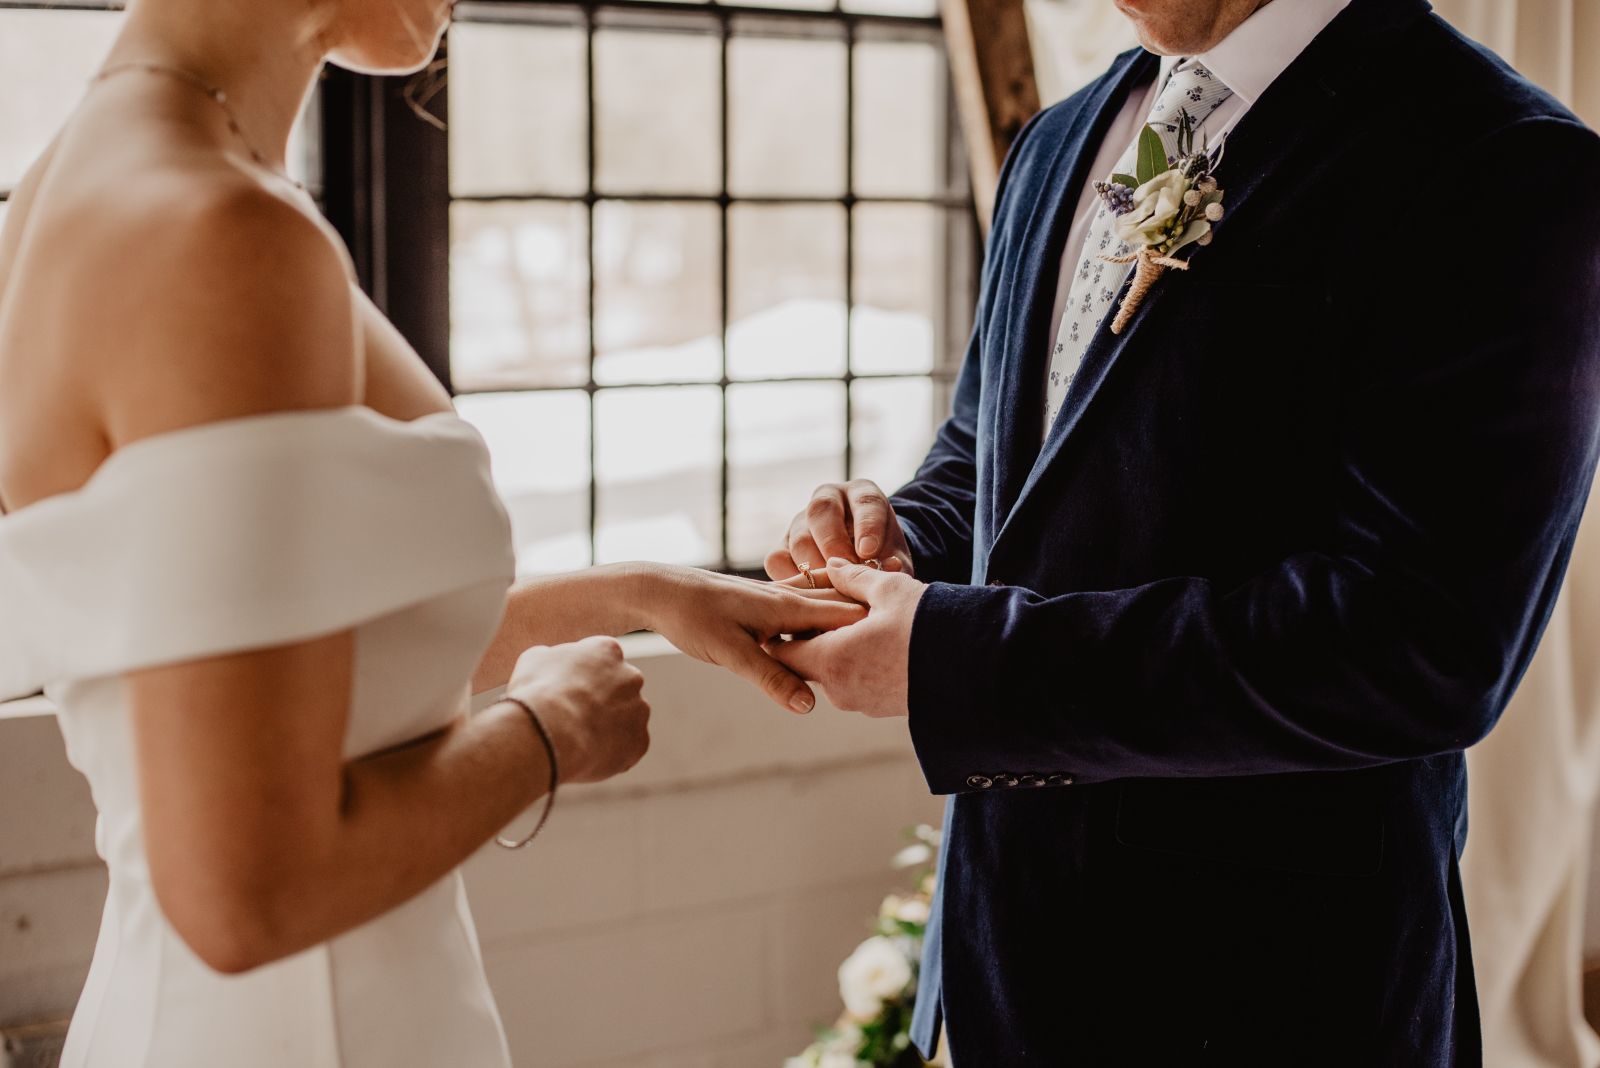 A groom handing over a wedding ring